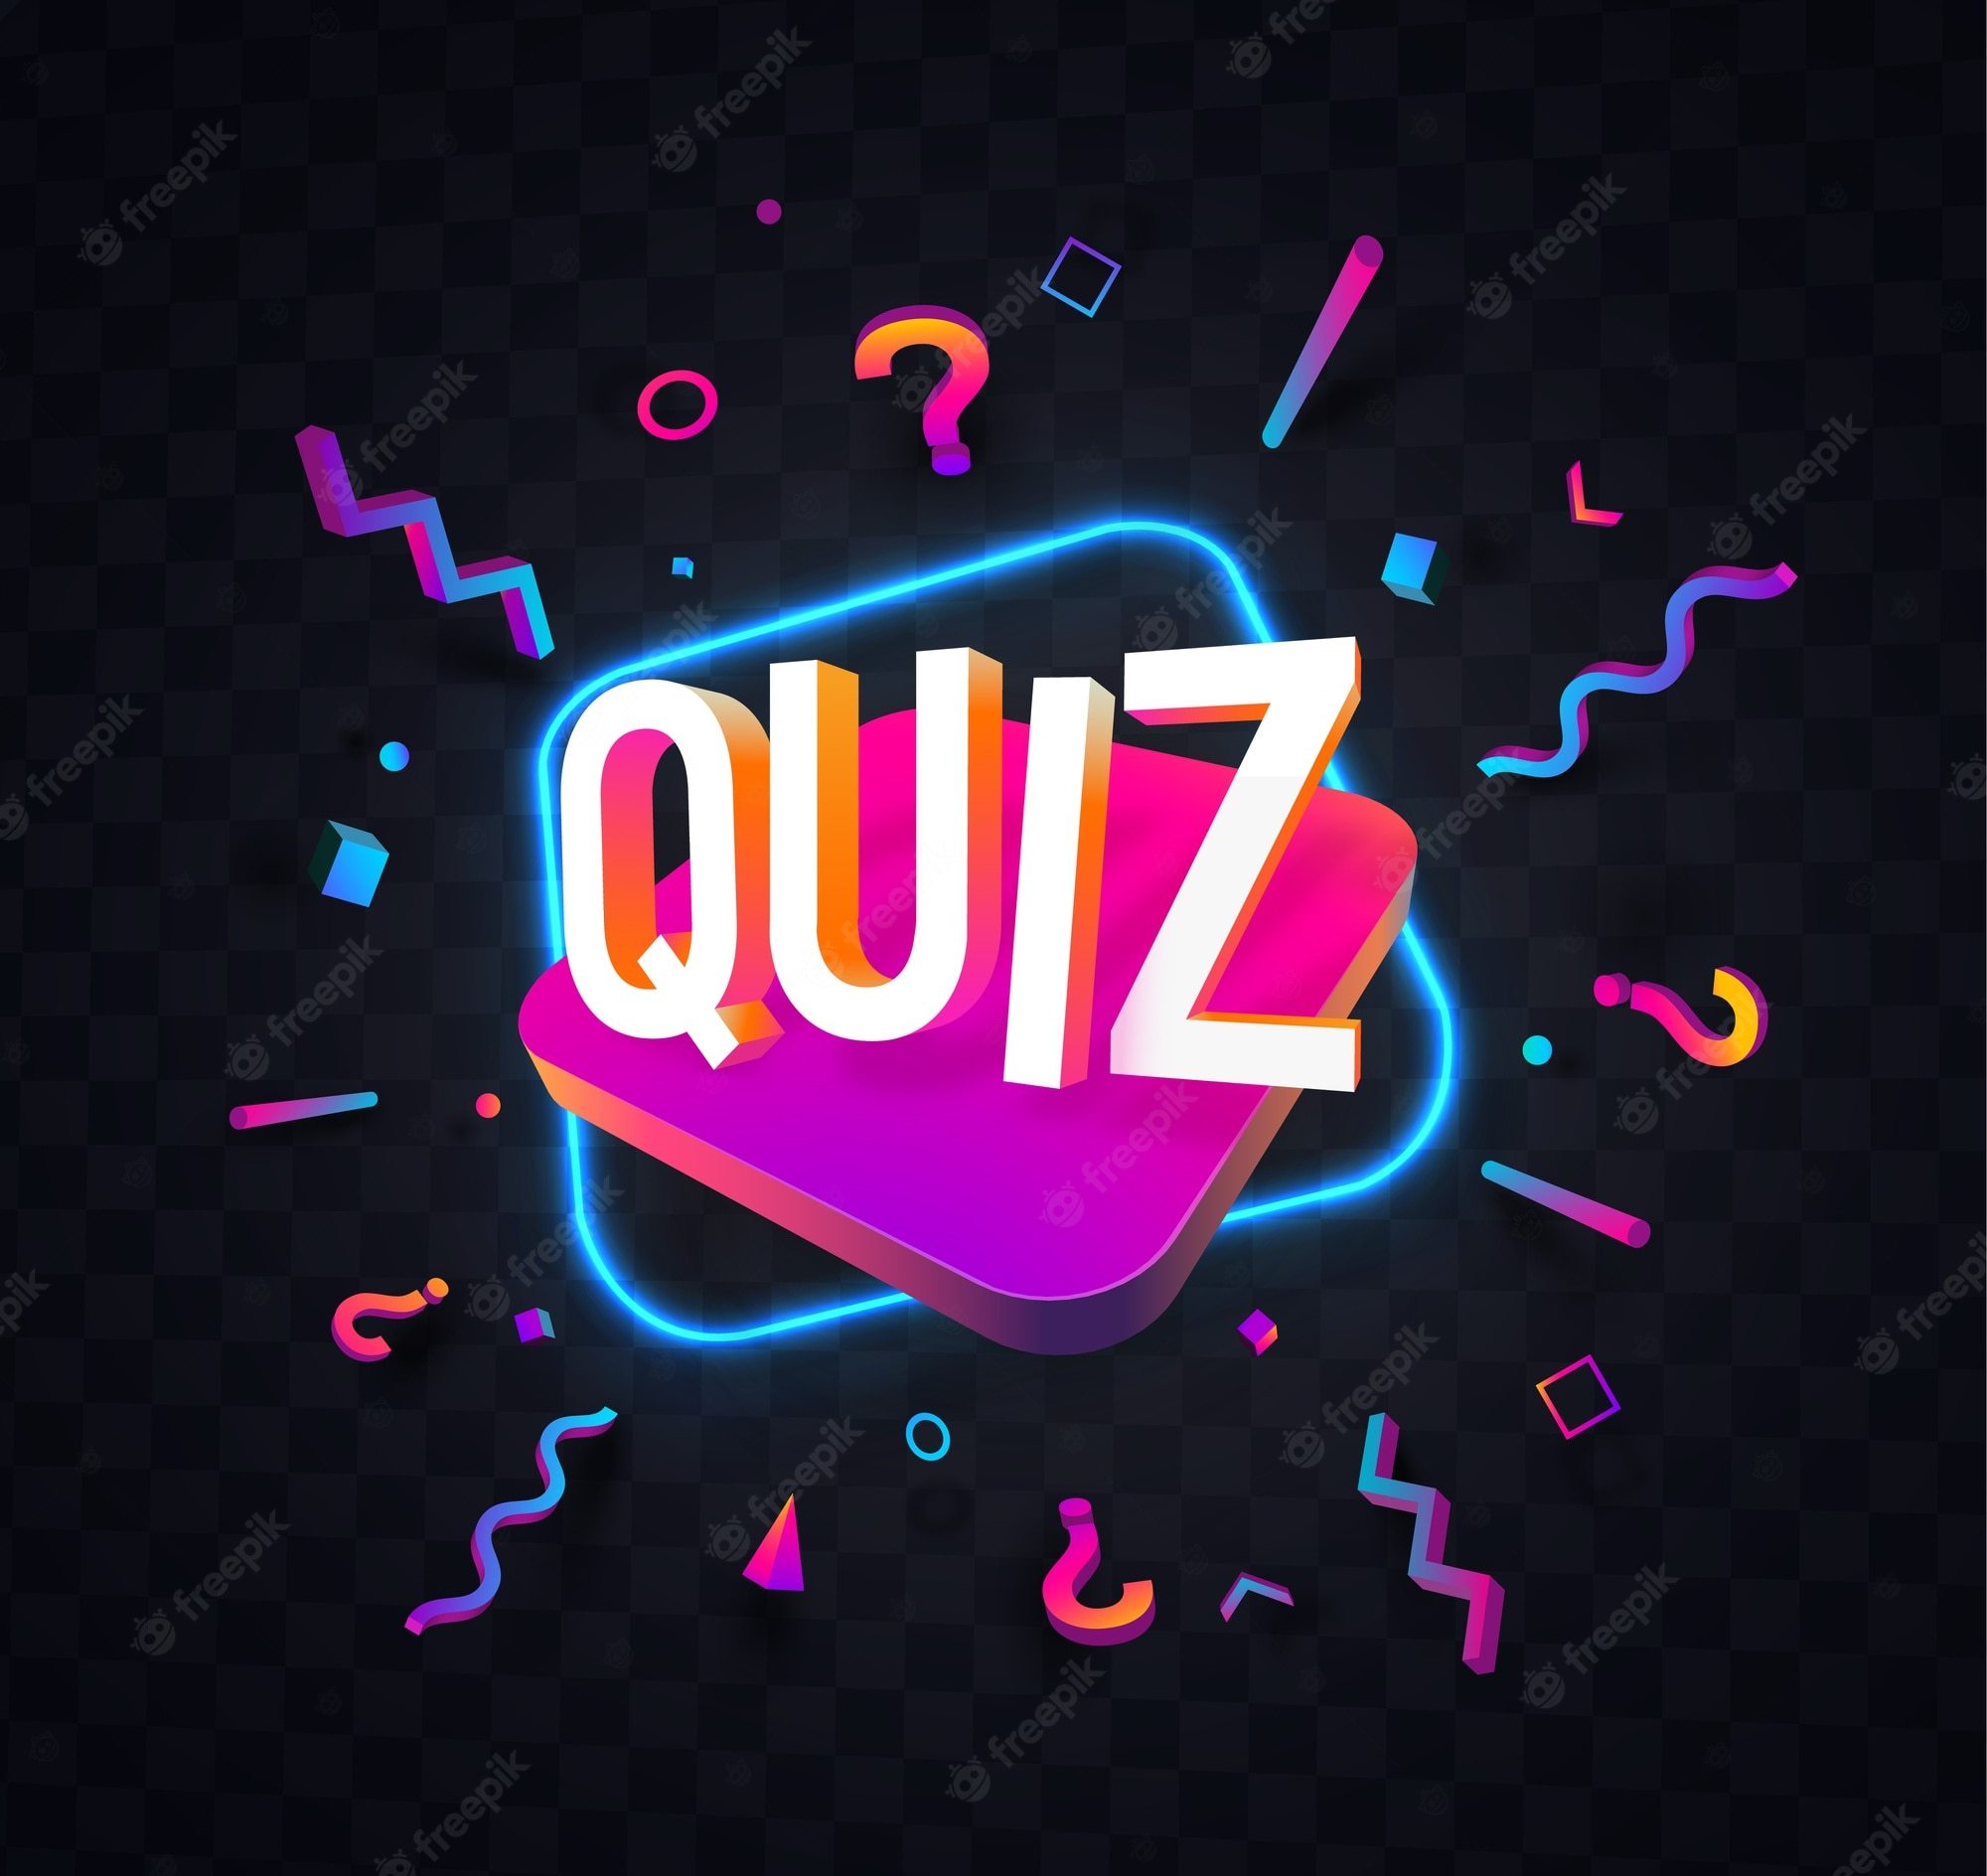 AM and PM - Year 3 - Quizizz